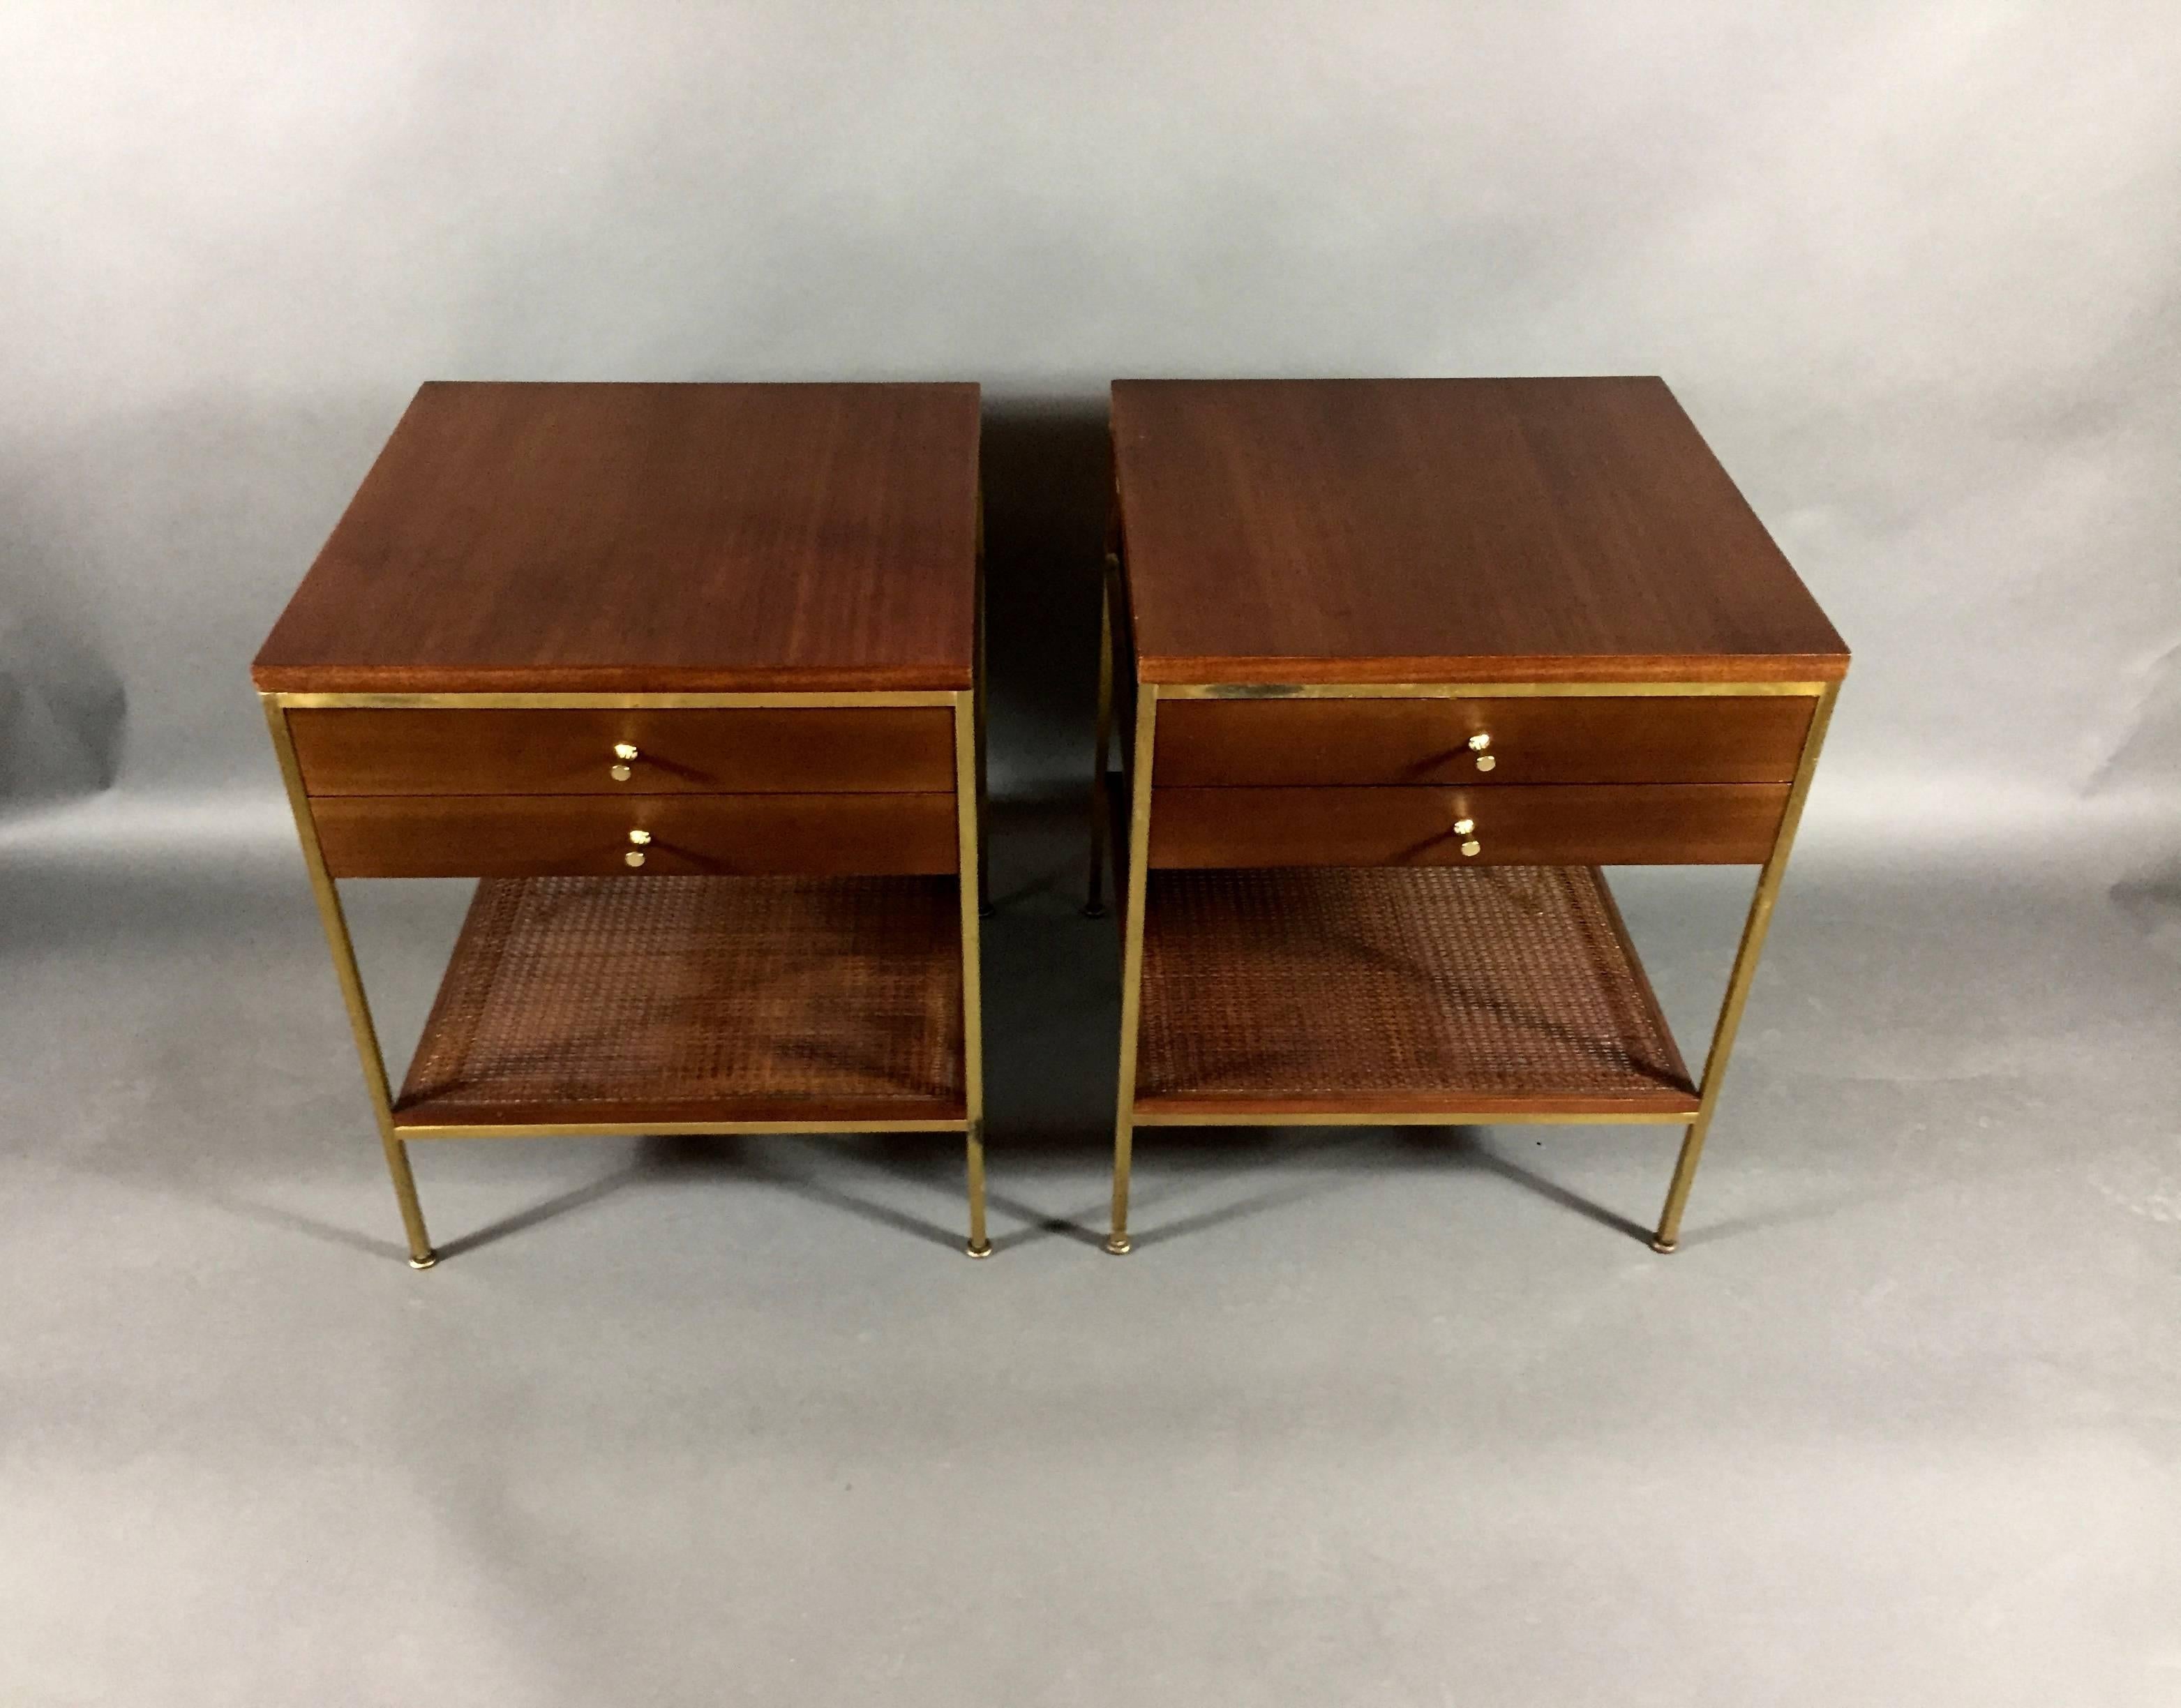 One of my favorite Paul McCobb designs - this pair of walnut nightstands or end tables is made with his iconic brass frame, two front drawers and lower cane shelf. Marked Calvin Grand Rapids - The Irvin Collection. Newly refinished walnut, brass in